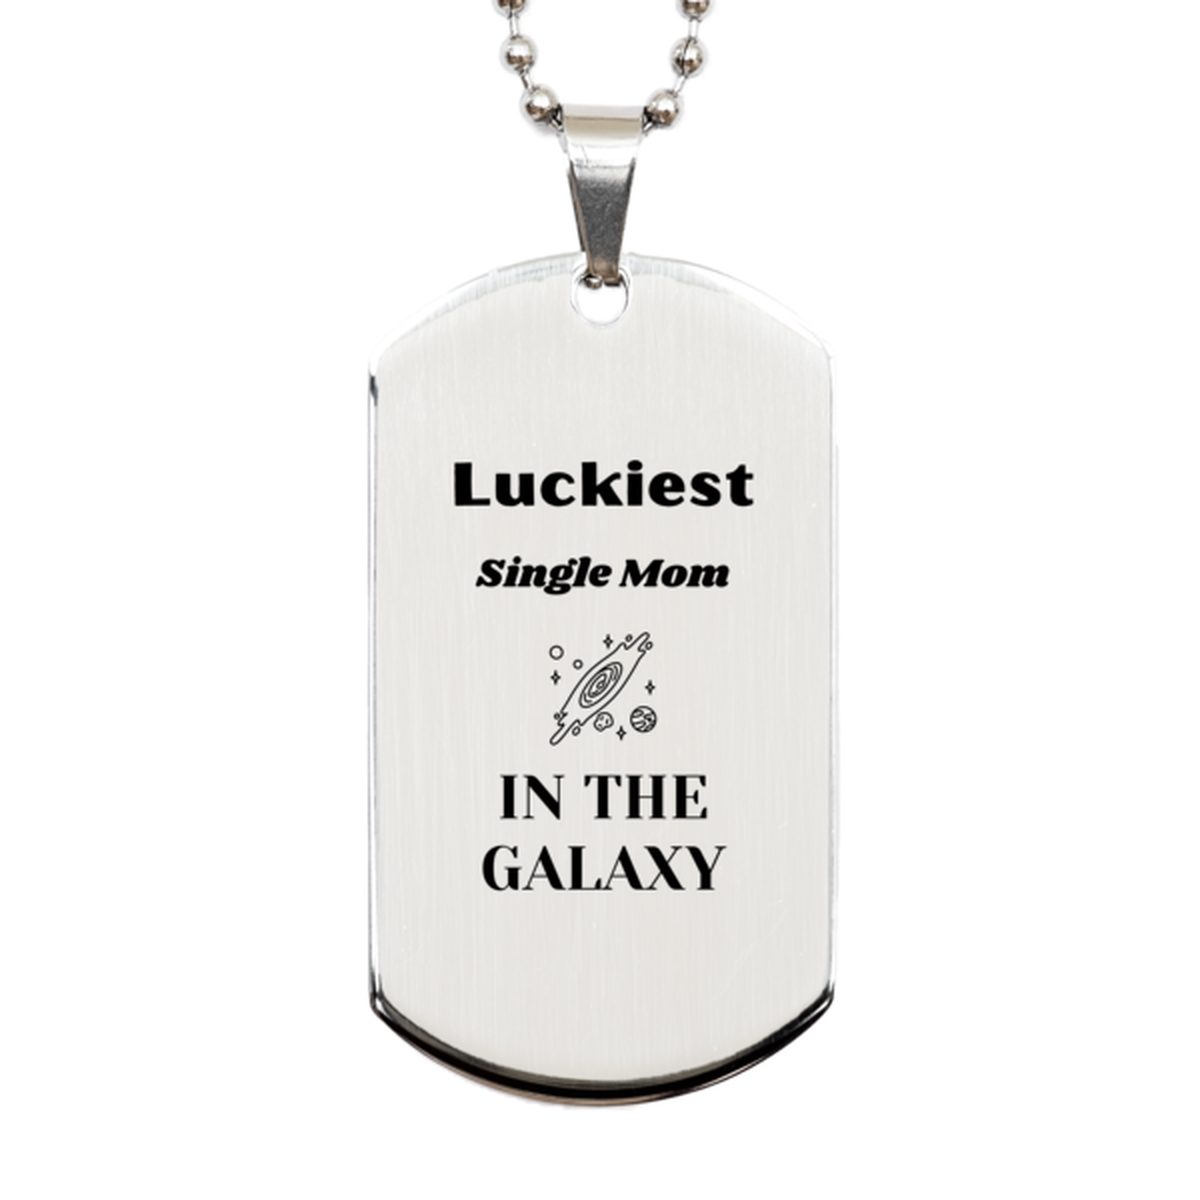 Luckiest Single Mom in the Galaxy, To My Single Mom Engraved Gifts, Christmas Single Mom Silver Dog Tag Gifts, X-mas Birthday Unique Gifts For Single Mom Men Women